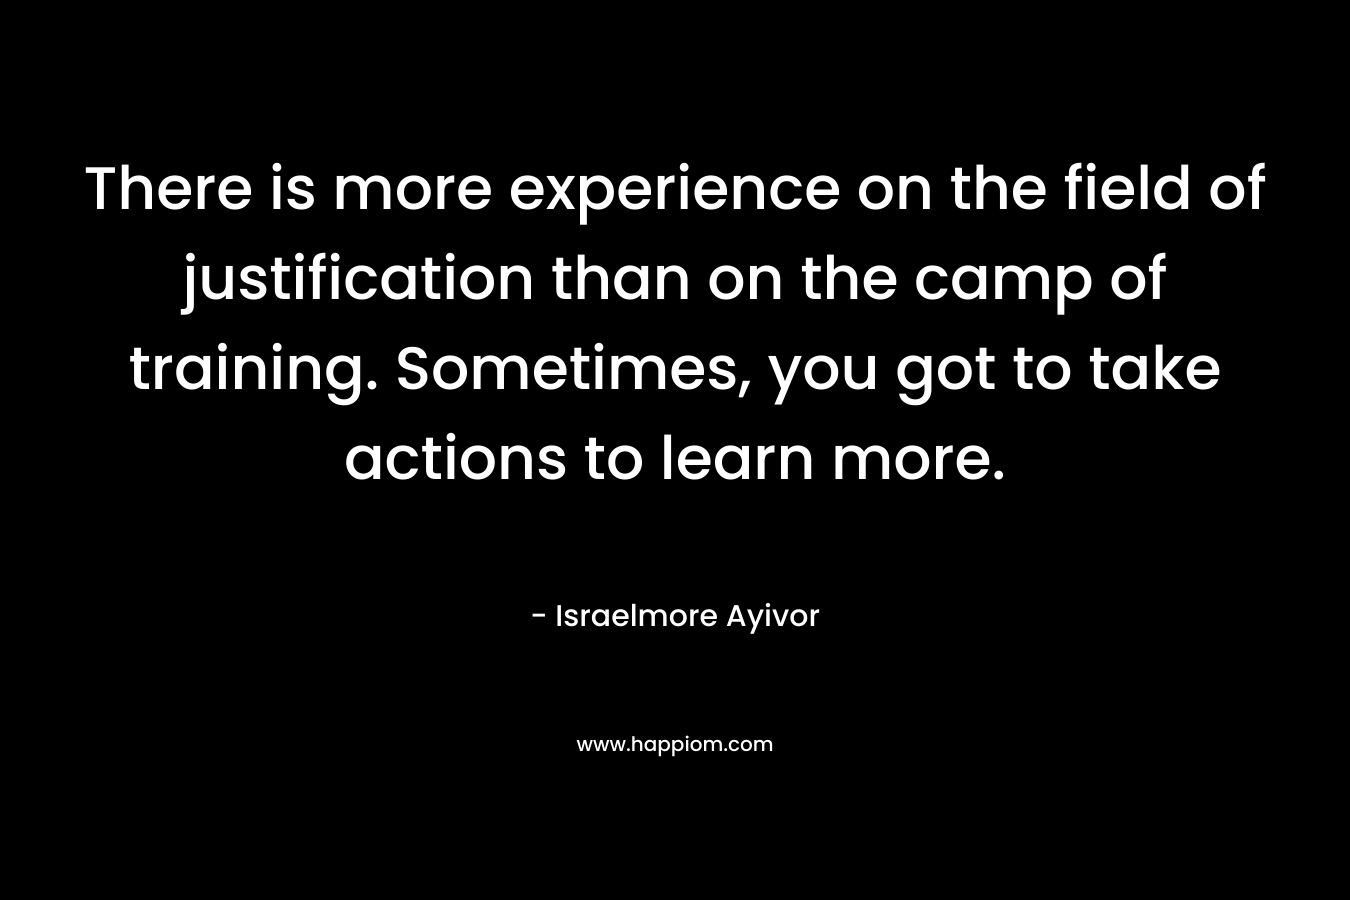 There is more experience on the field of justification than on the camp of training. Sometimes, you got to take actions to learn more. – Israelmore Ayivor